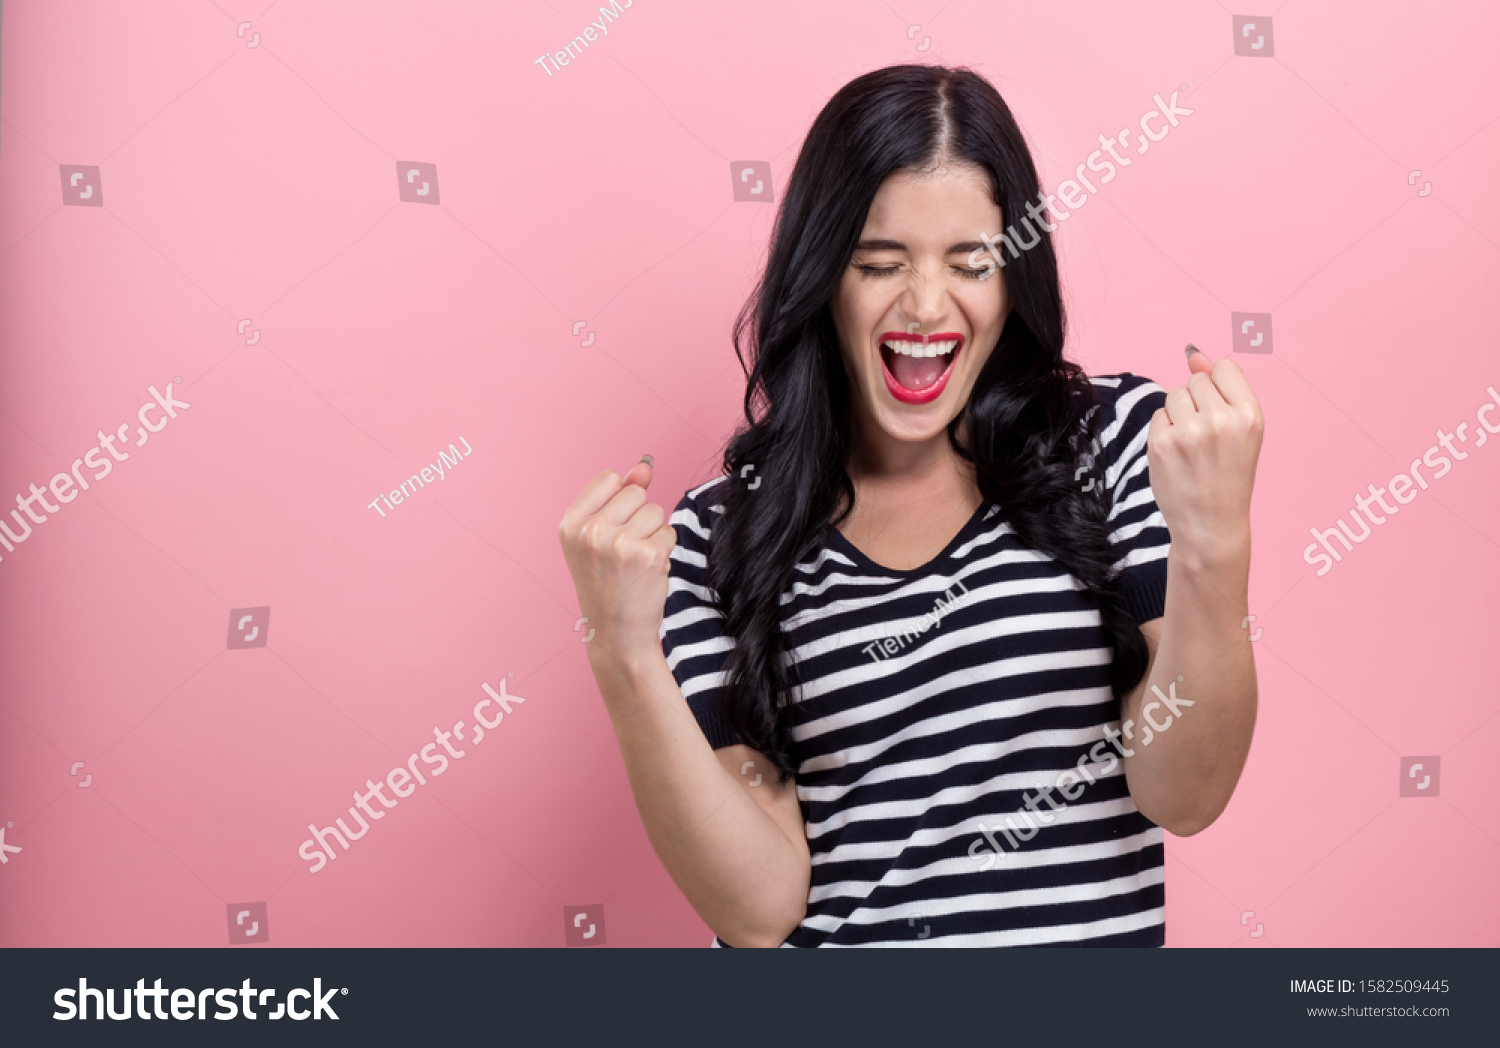 Happy young woman making a yay gesture on a pink background #1582509445